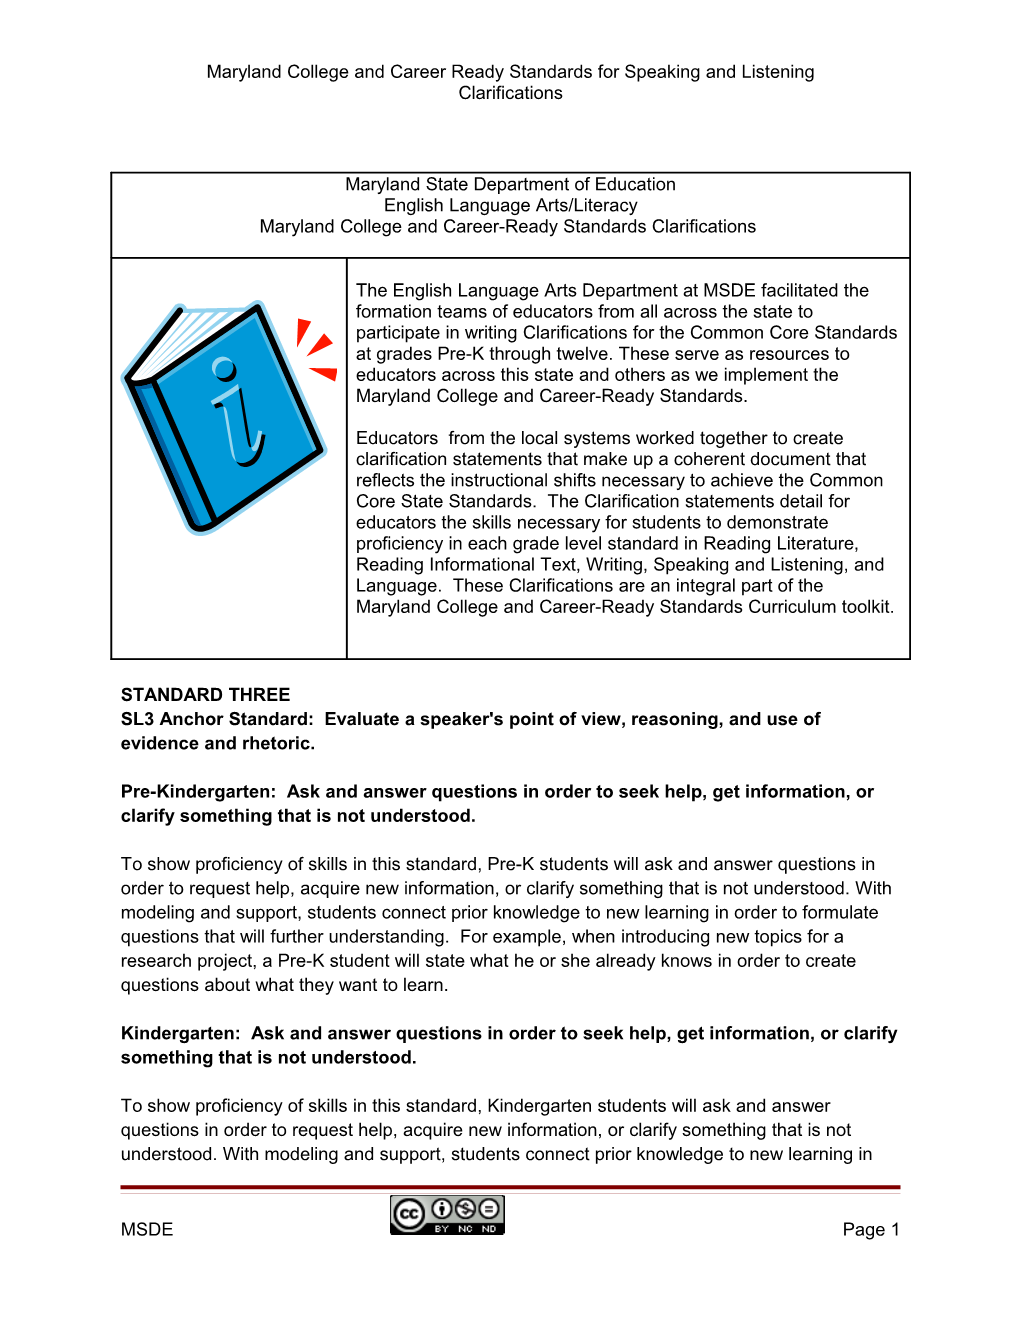 Maryland College and Career Ready Standards for Speaking and Listening